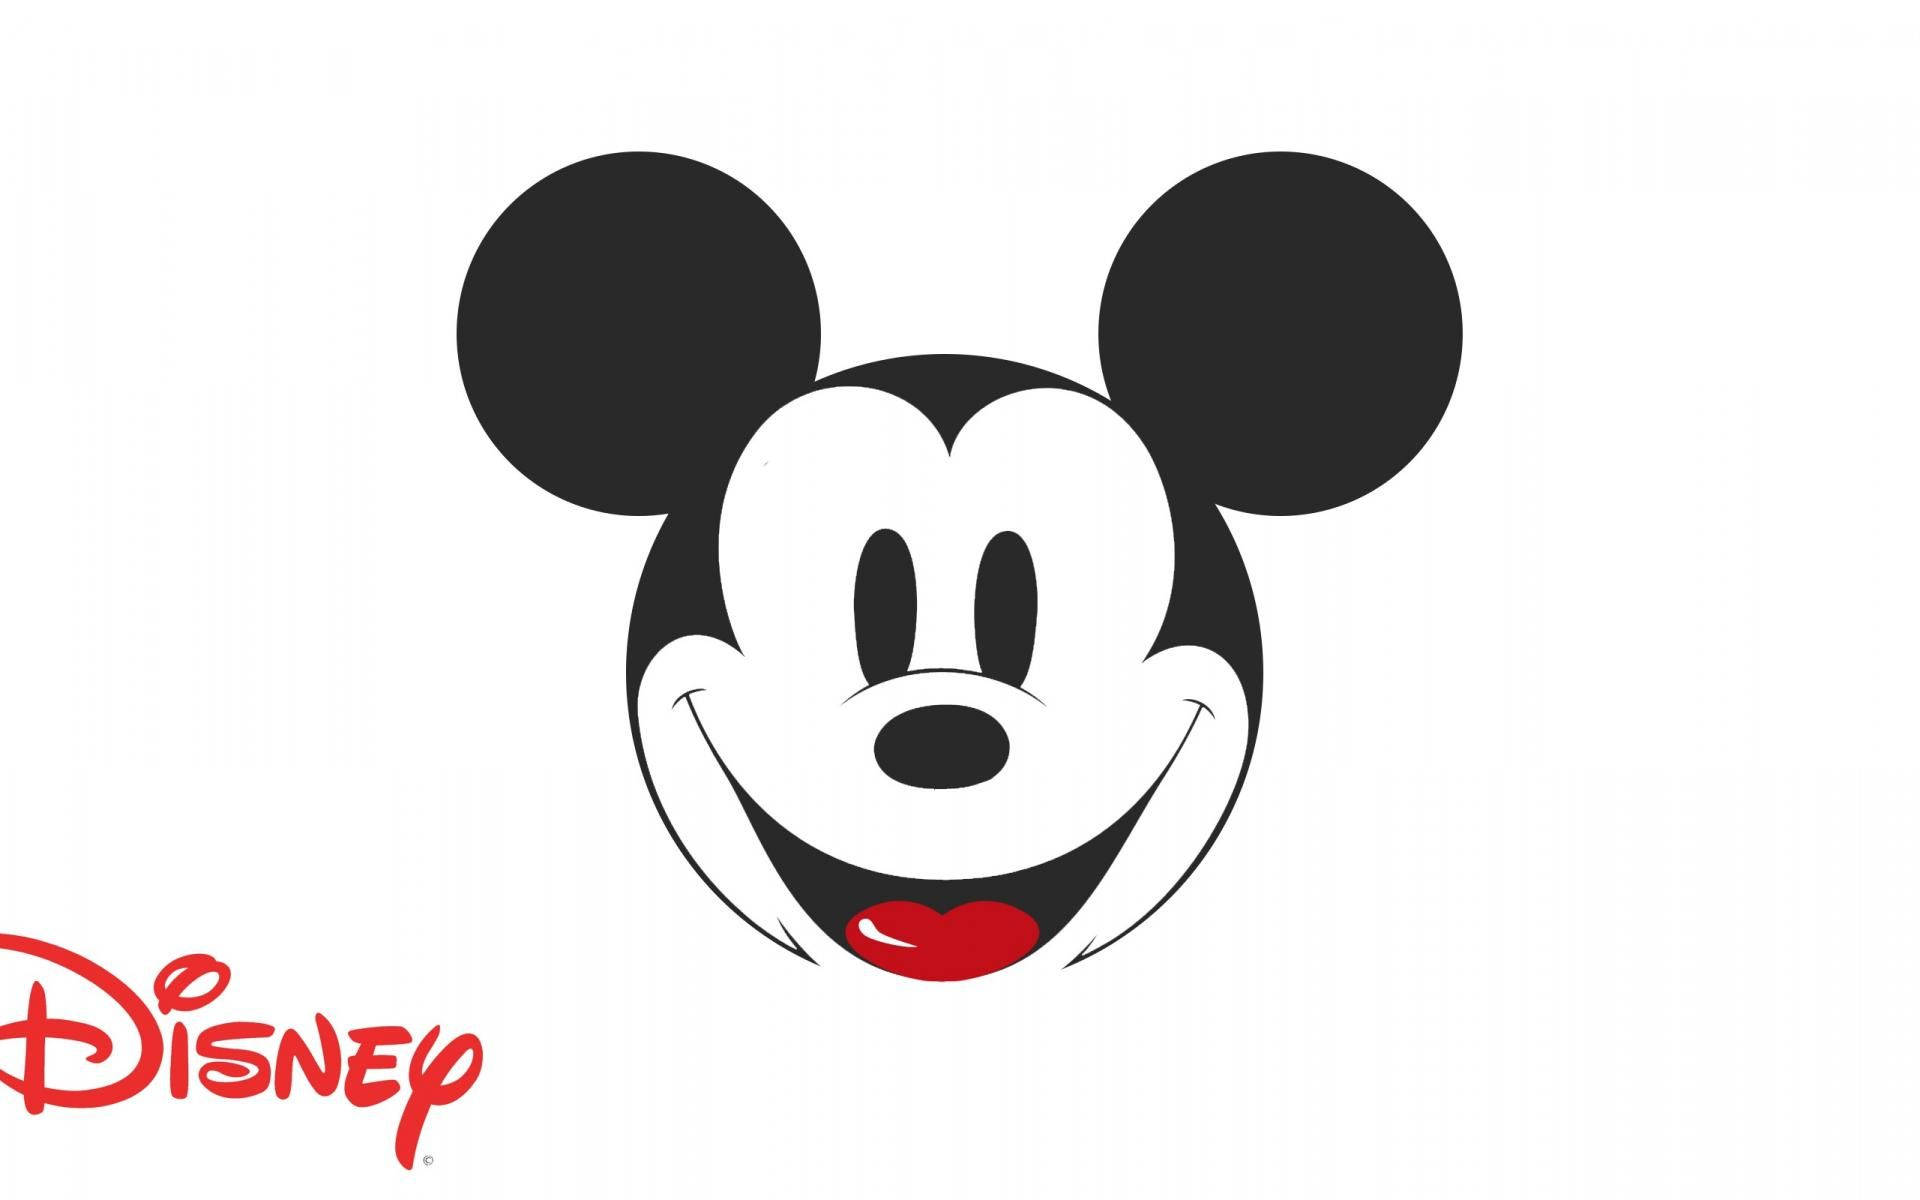 How to Draw Mickey Mouse : 8 Steps - Instructables